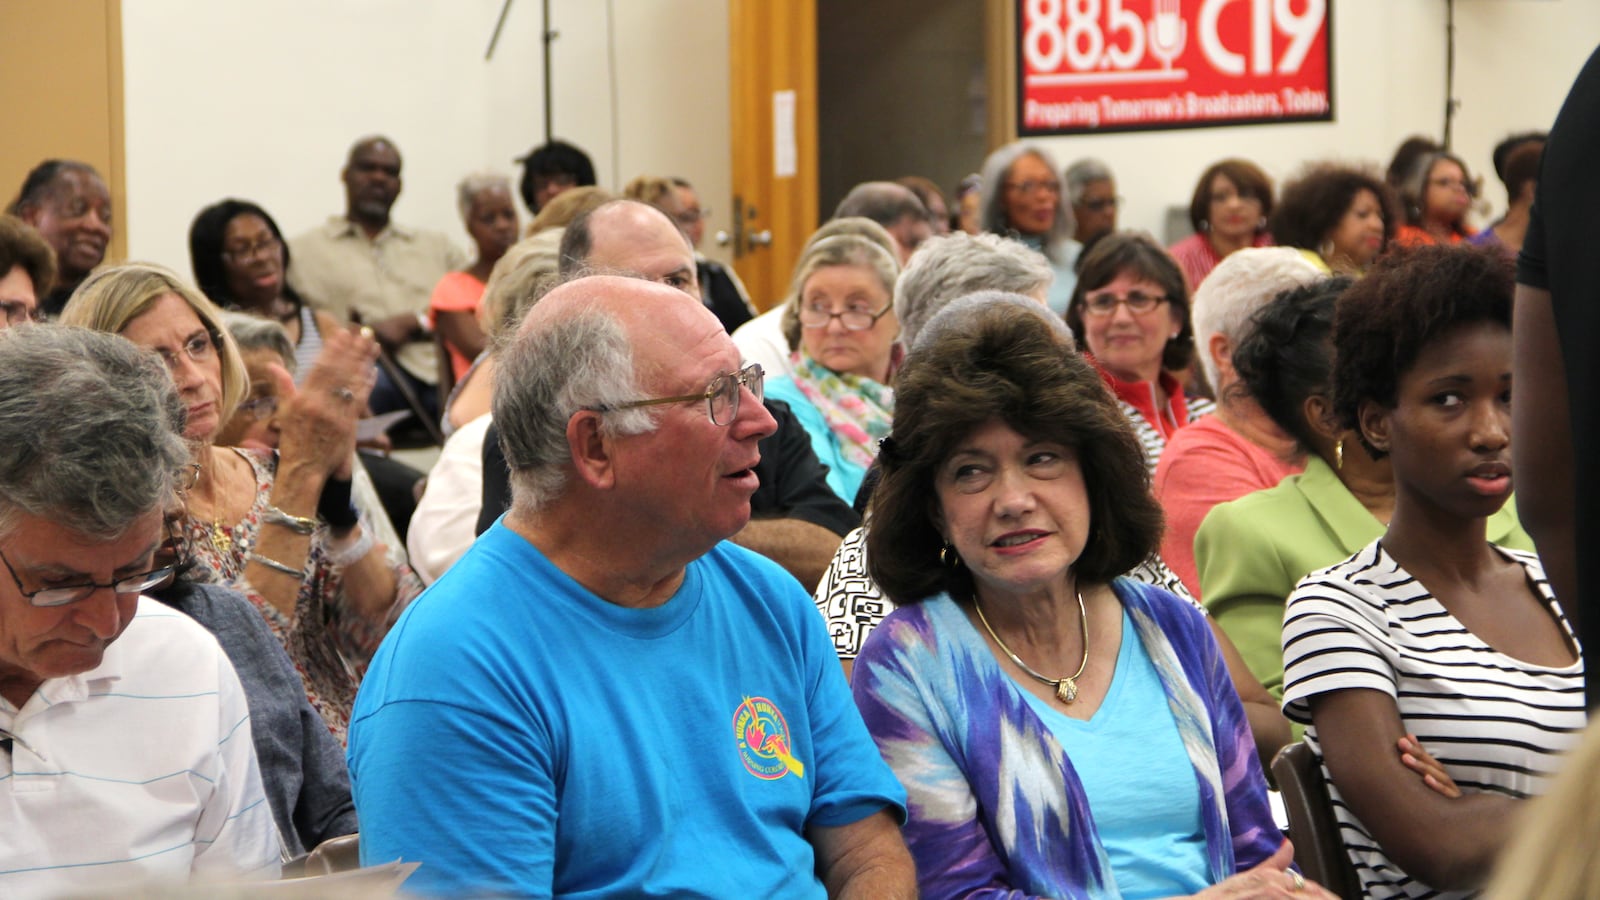 Retired educators attend a forum in Memphis last summer before the Shelby County Board of Education to discuss proposed cost-cutting changes to their retirement plans.